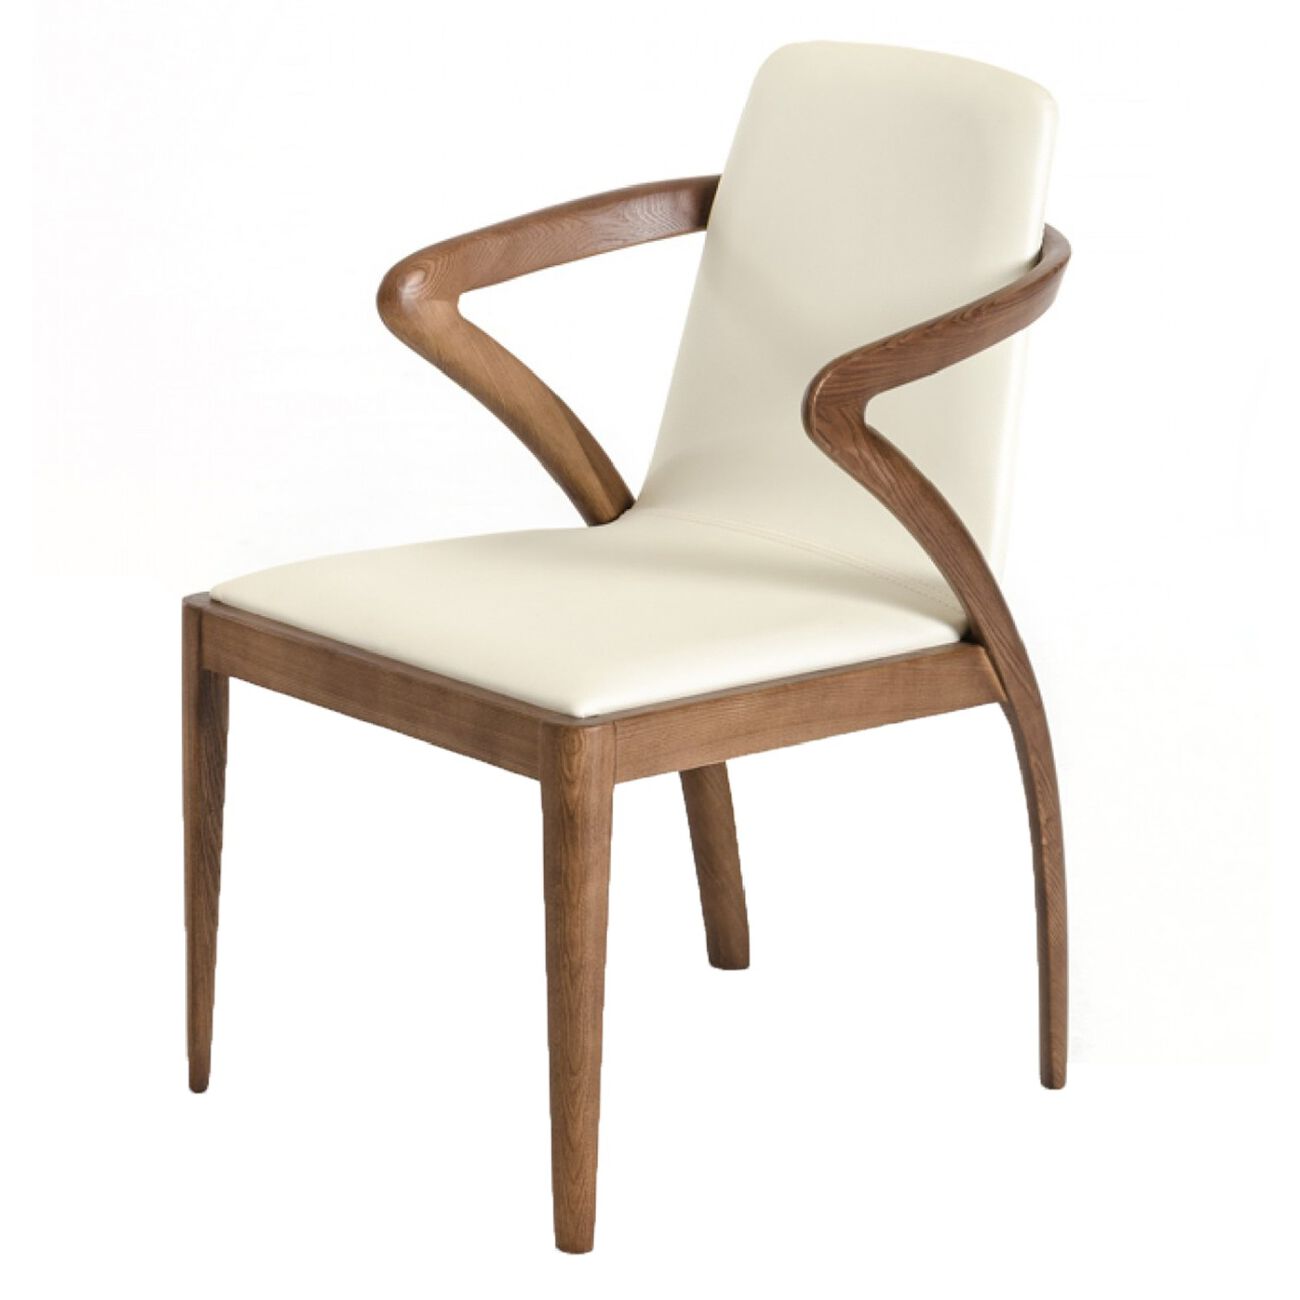 Leatherette Dining Chair with Curved Legs and Armrest, Cream and Brown